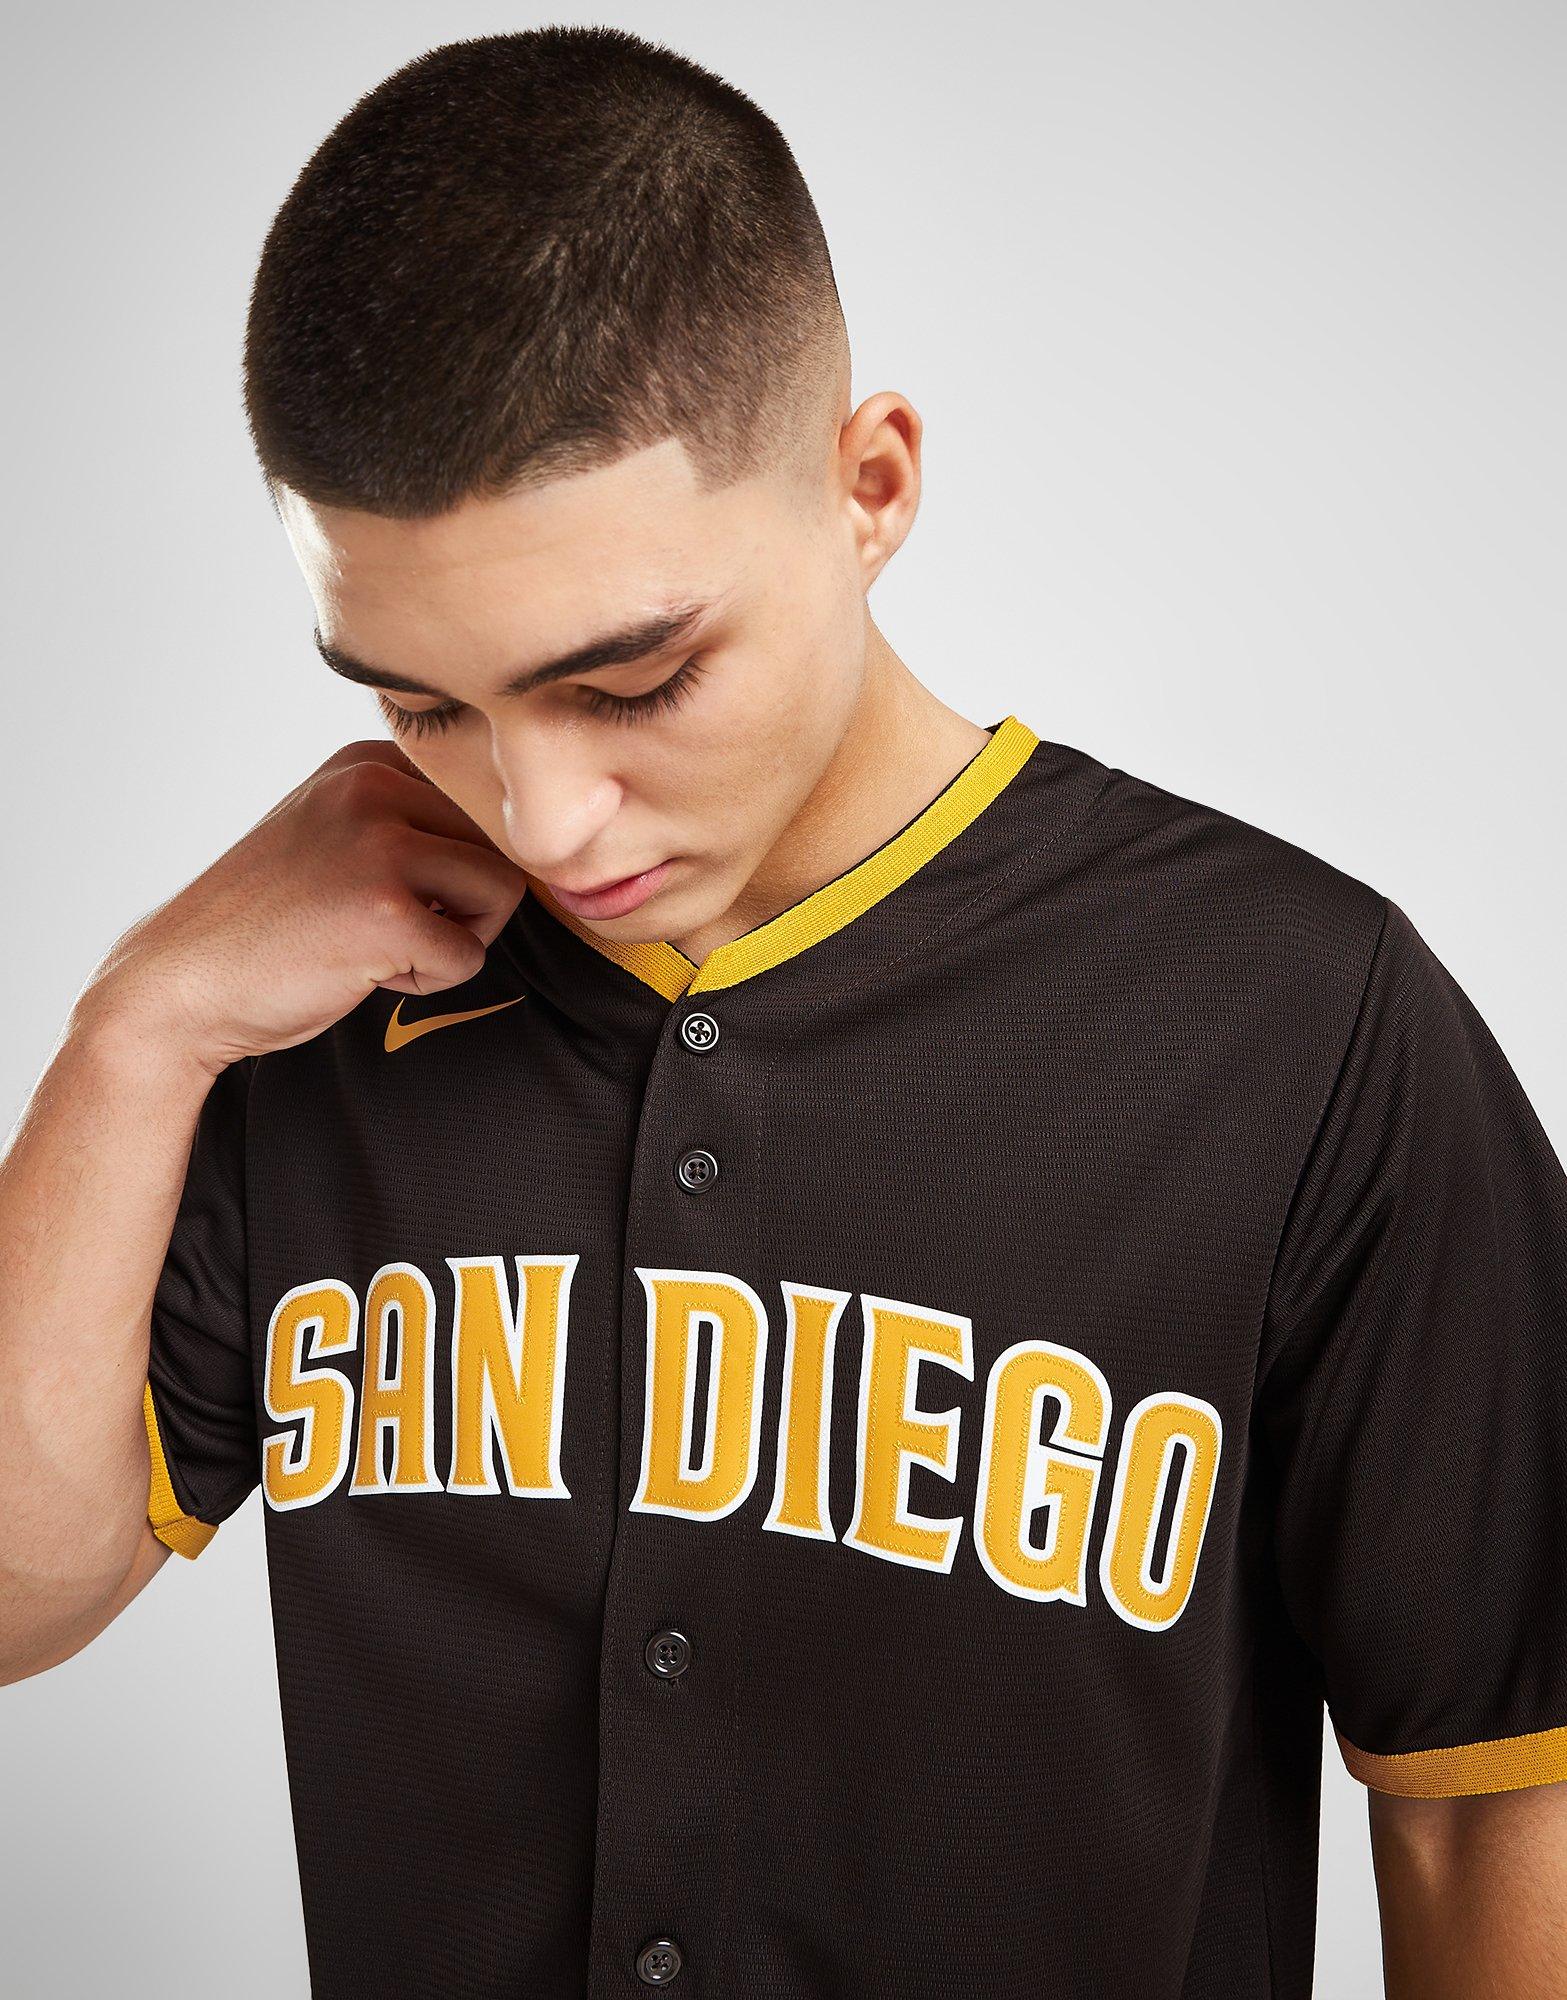 Size 52/2XL San Diego Padres Jersey 90s Padres Jersey Padres 